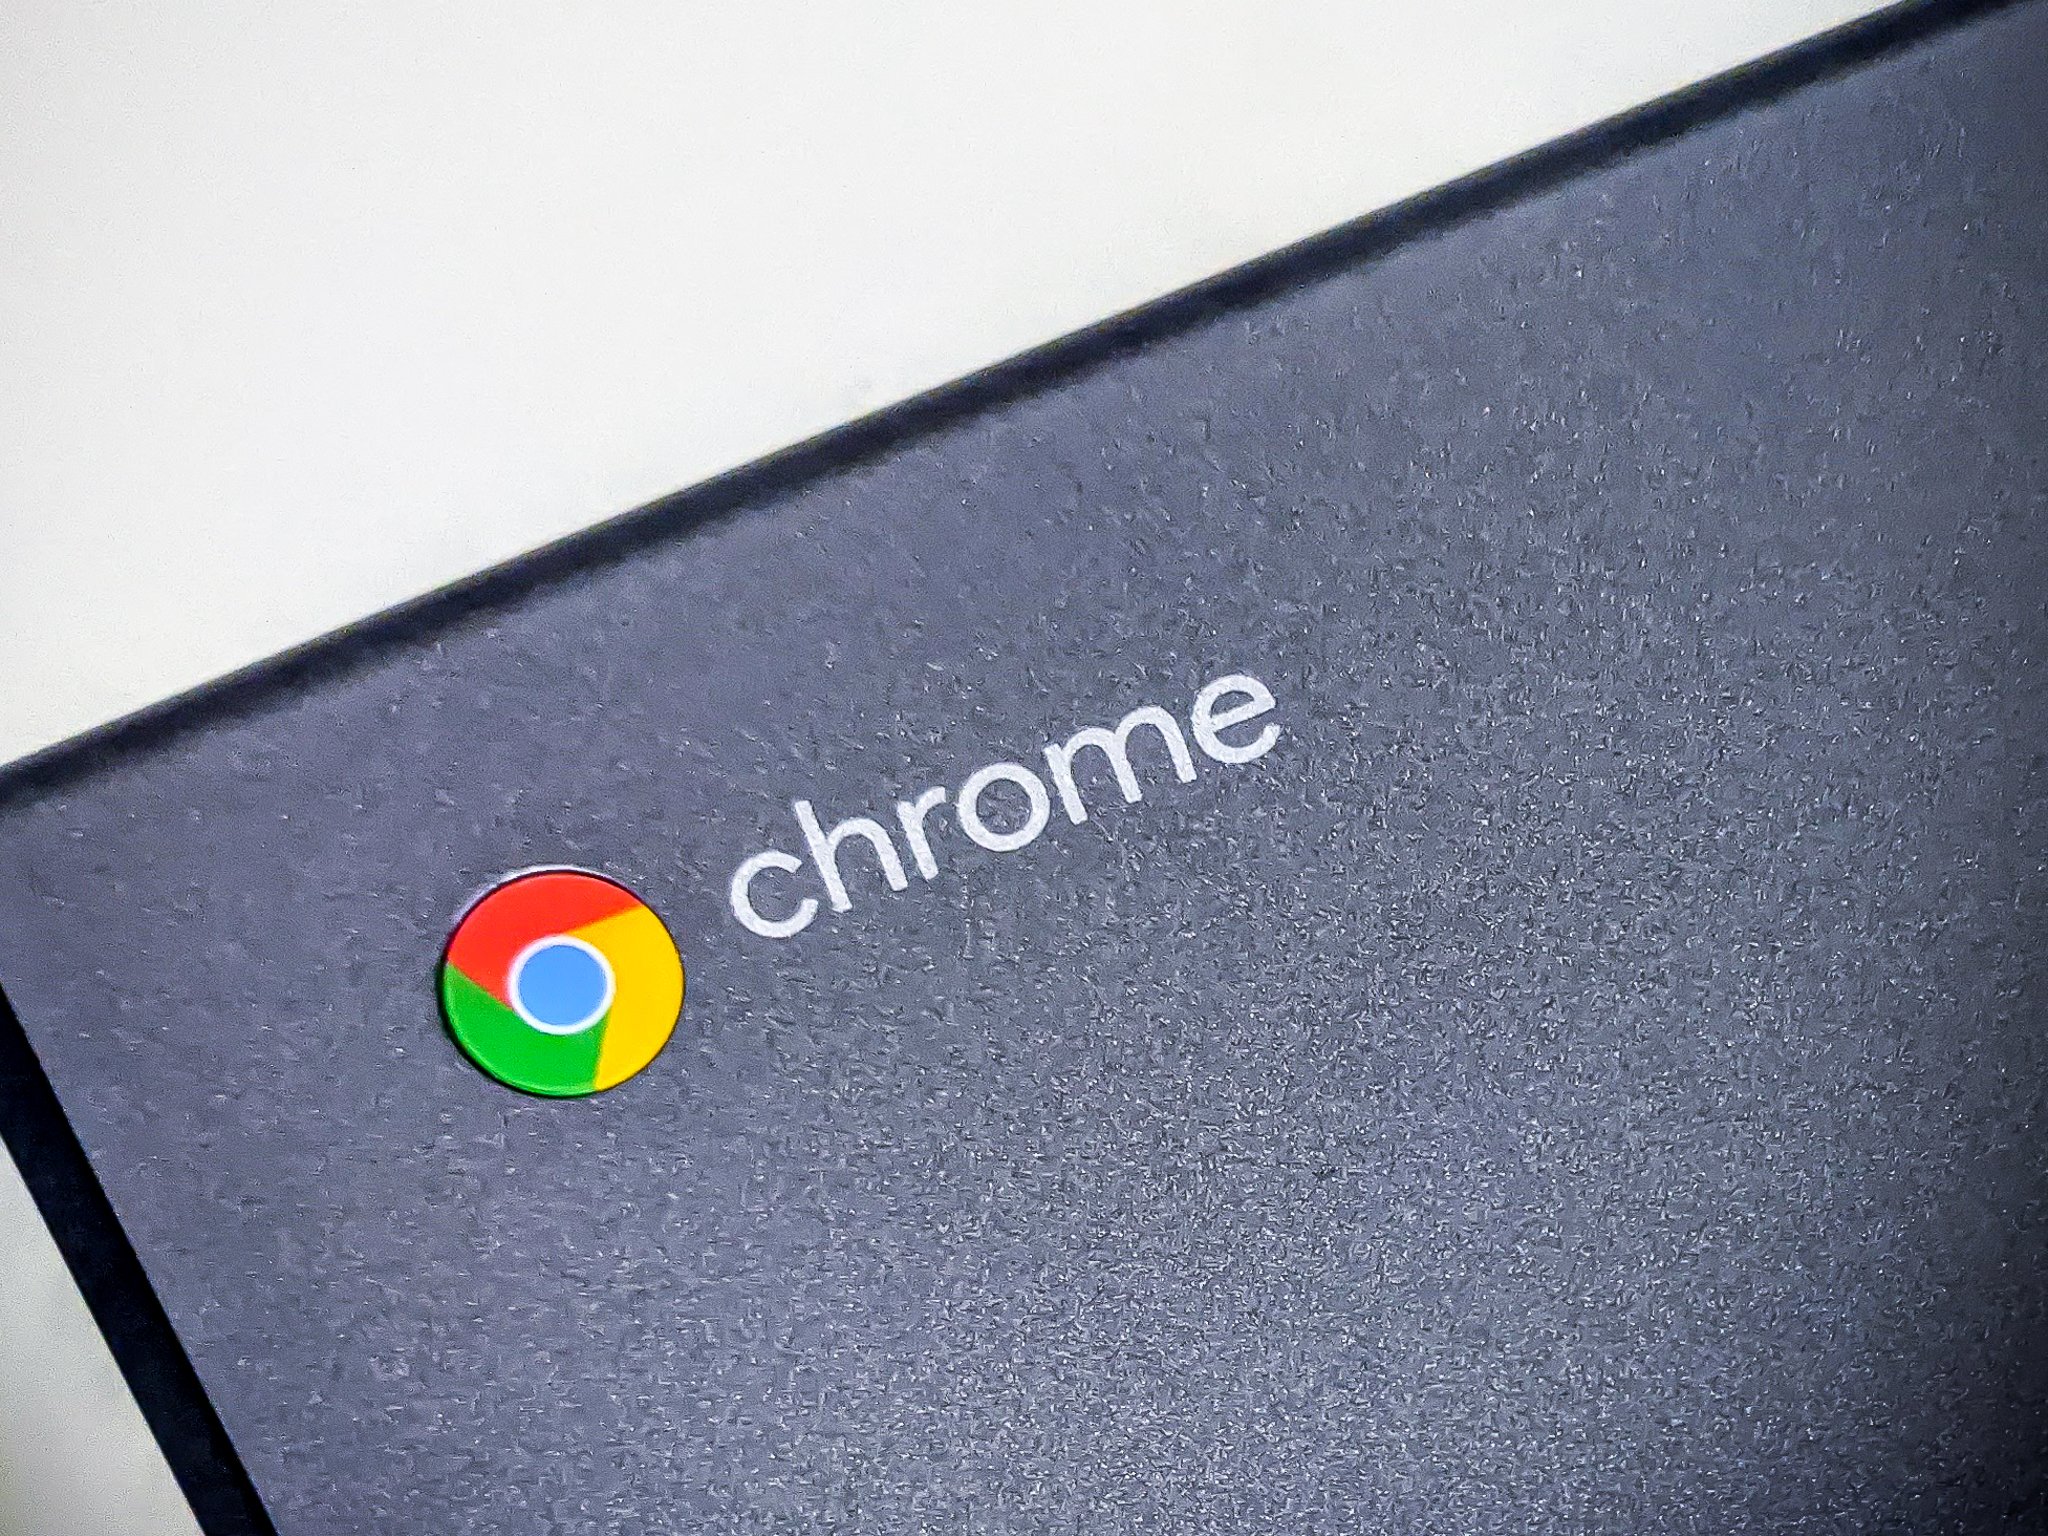 Should you buy a Chromebox in 2021?